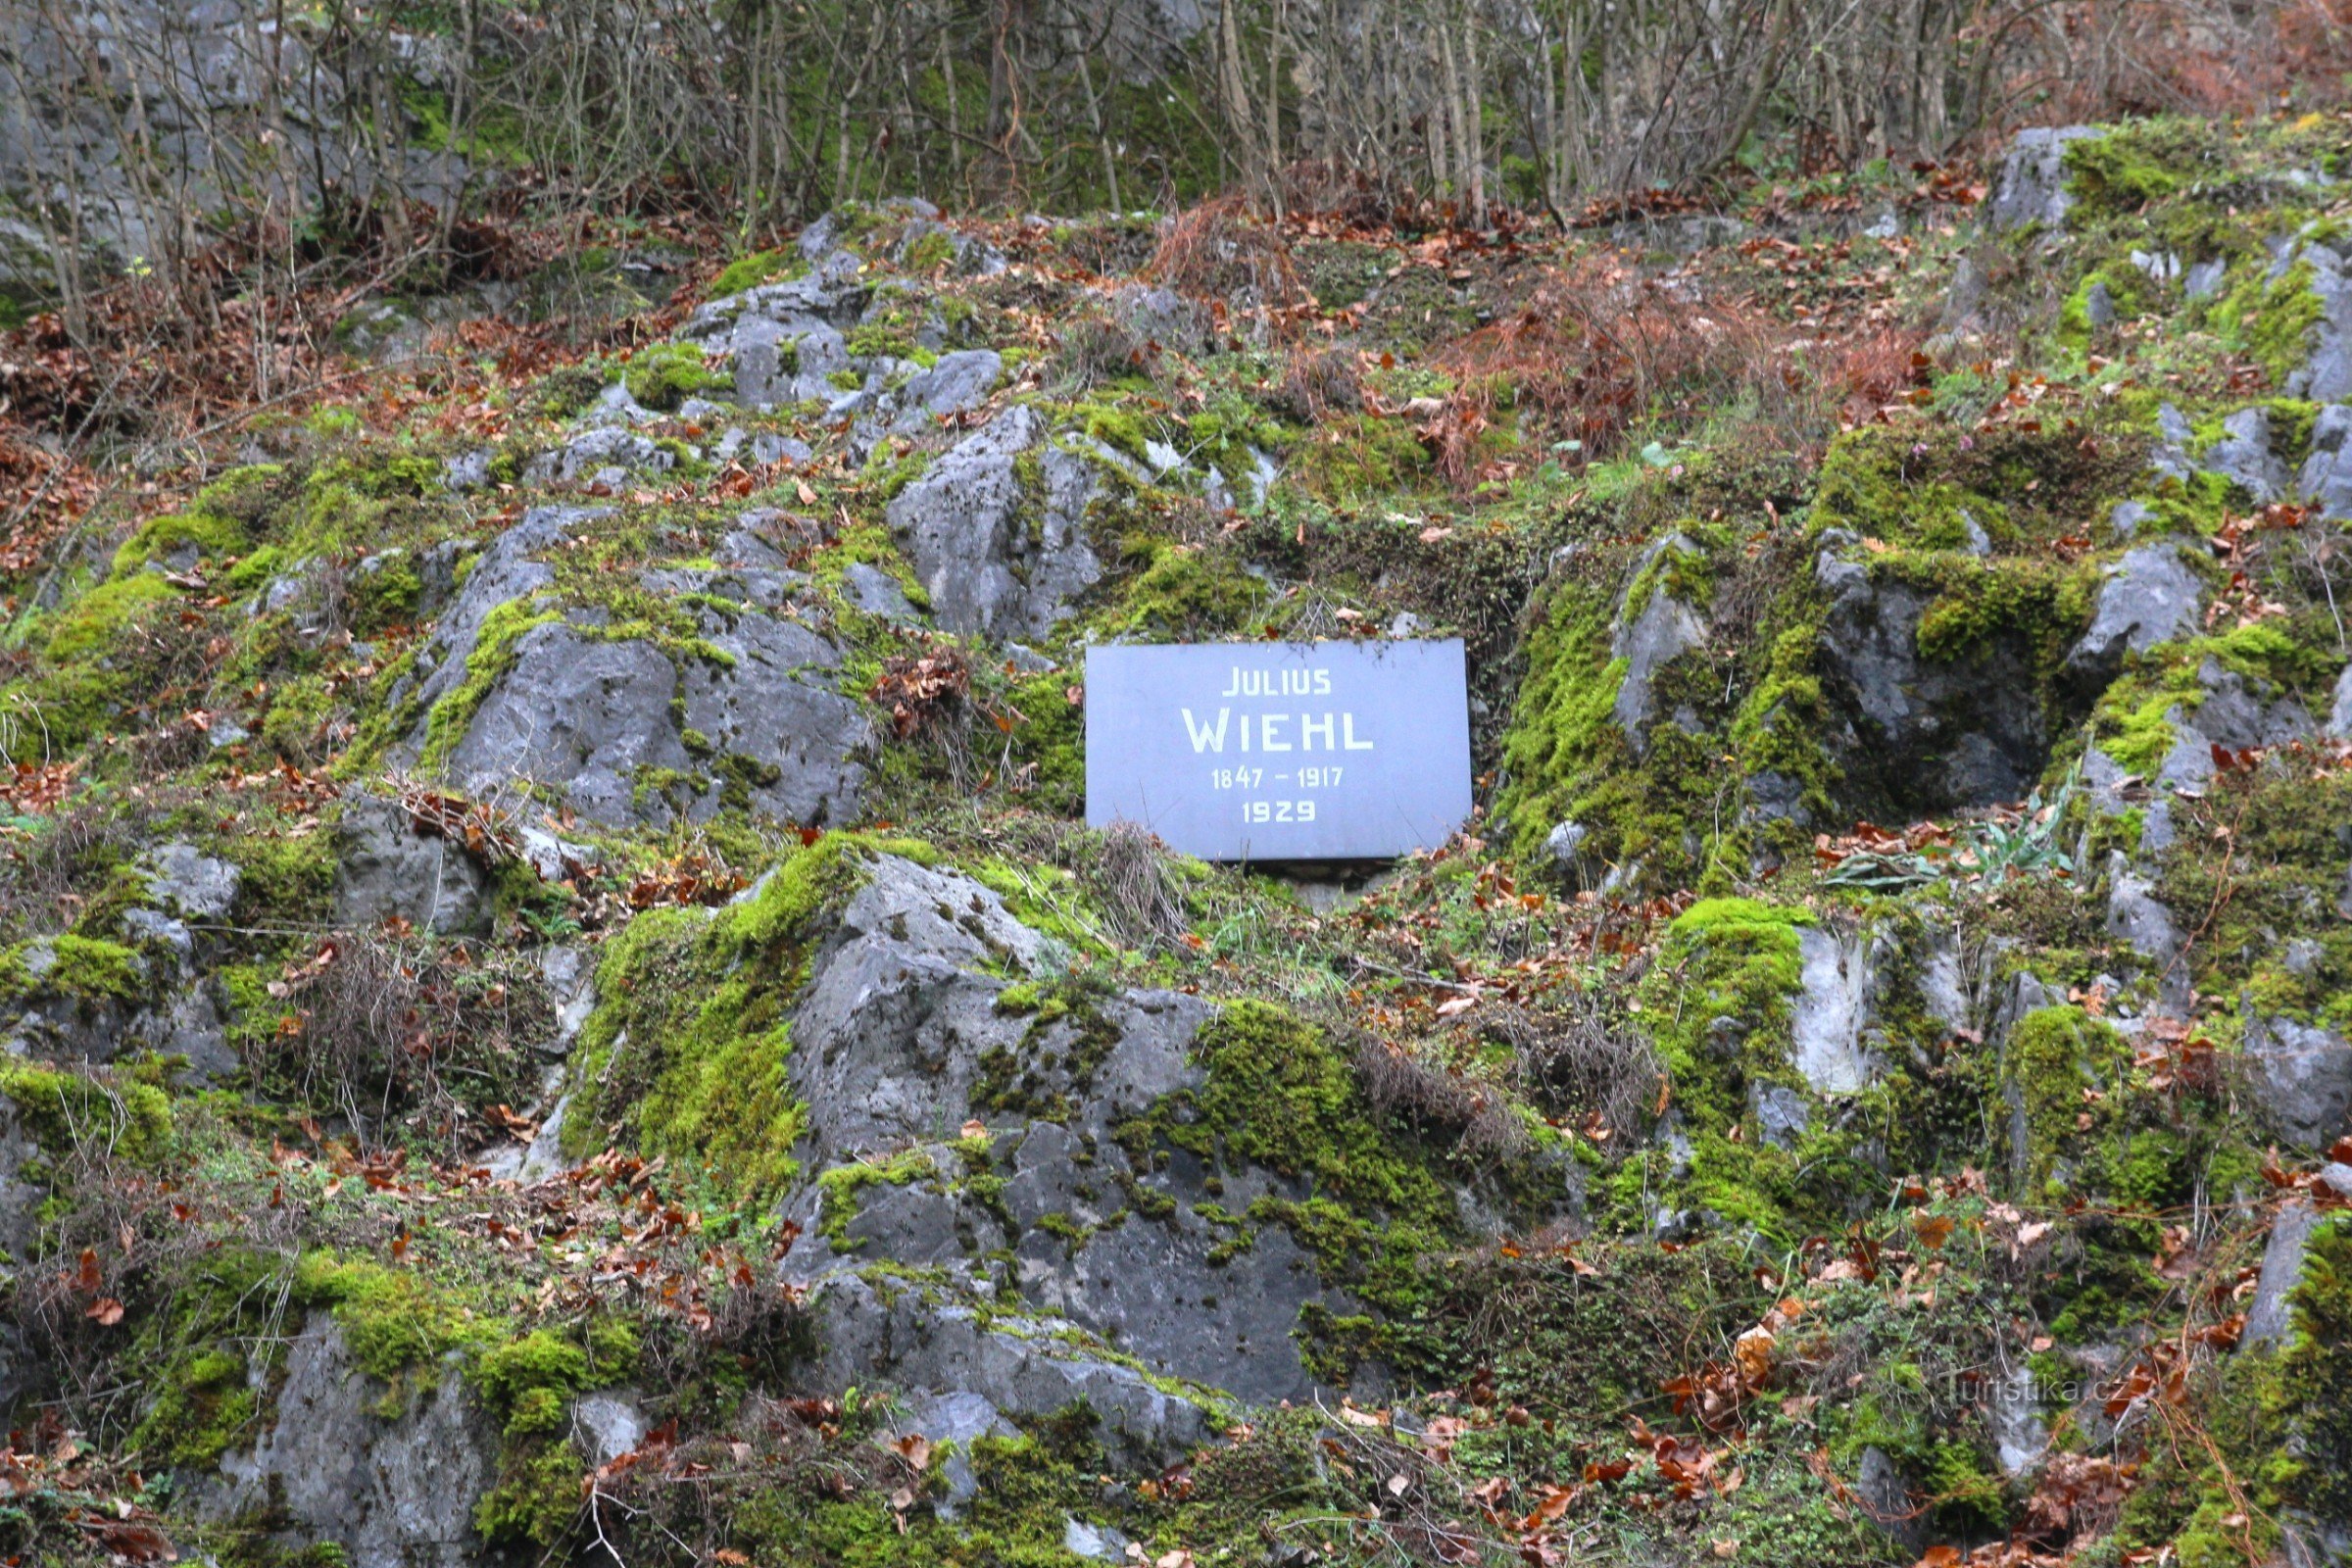 The memorial plaque is located in the stony slope below the old peasant log